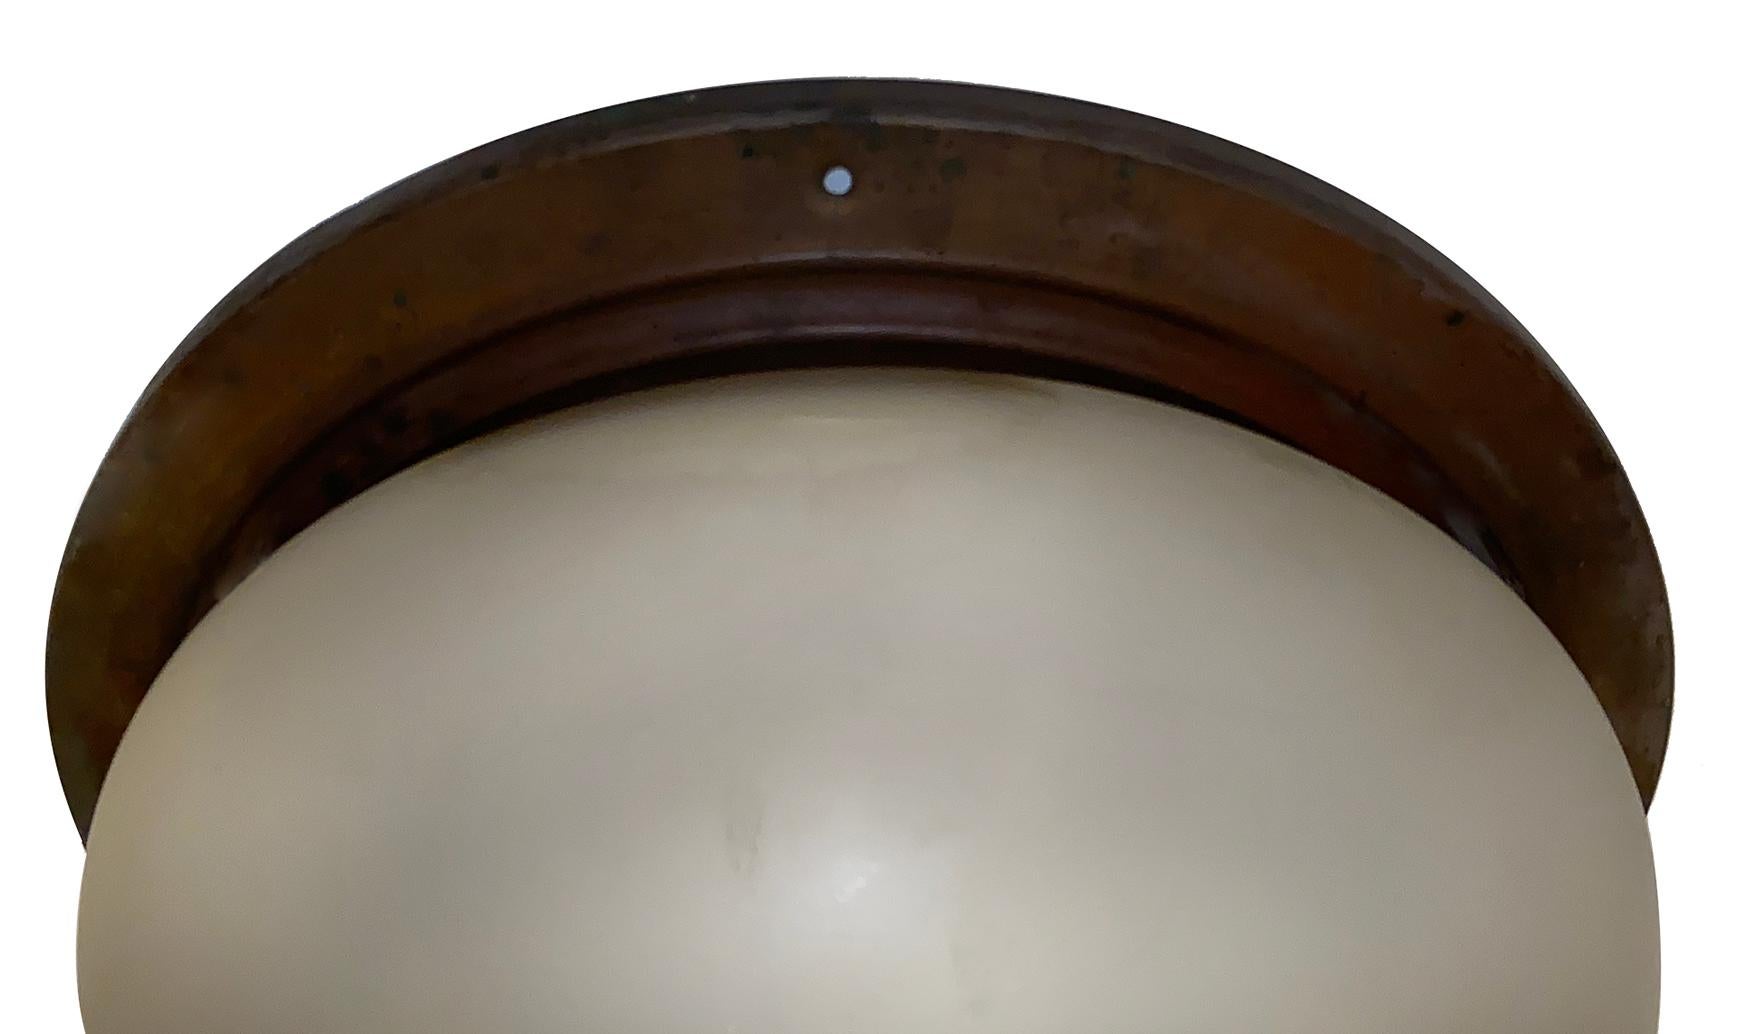 A circa 1920s French frosted glass light fixture with etched star pattern and patinated bronze body.

Measurements:
Height 9